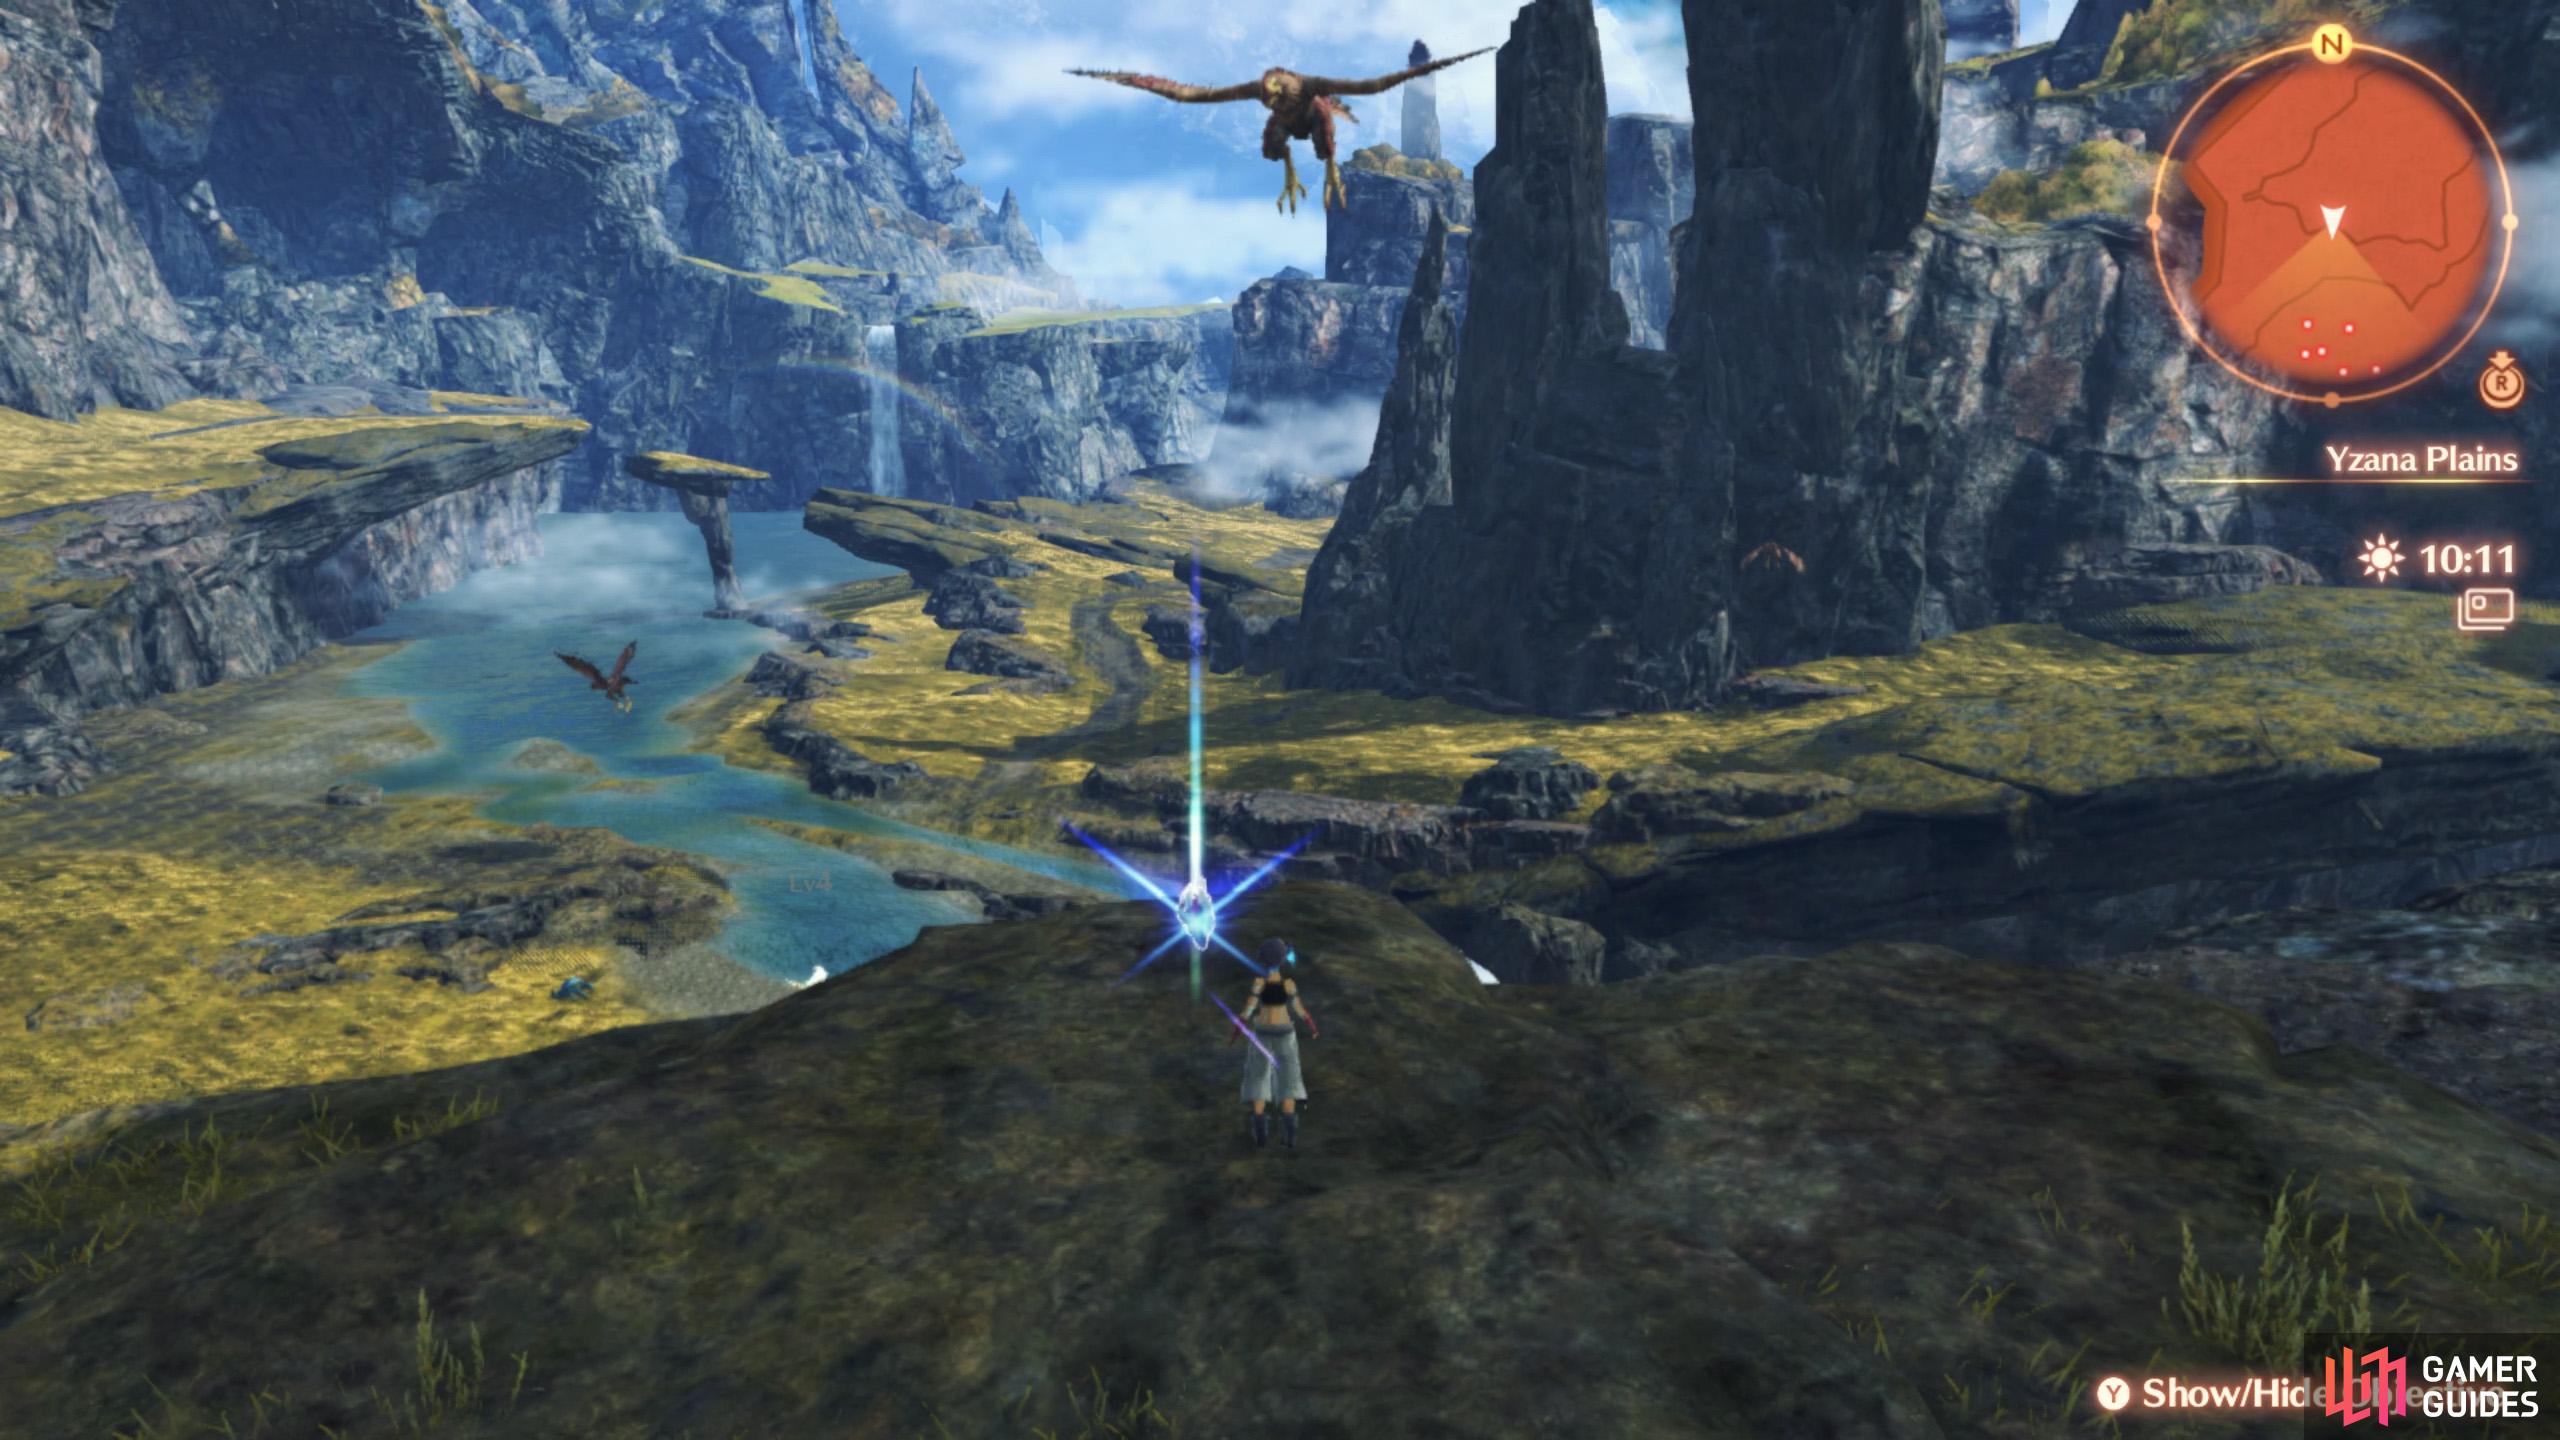 Xenoblade Chronicles 3' Review: The Mysterious World Of Aionios Beckons